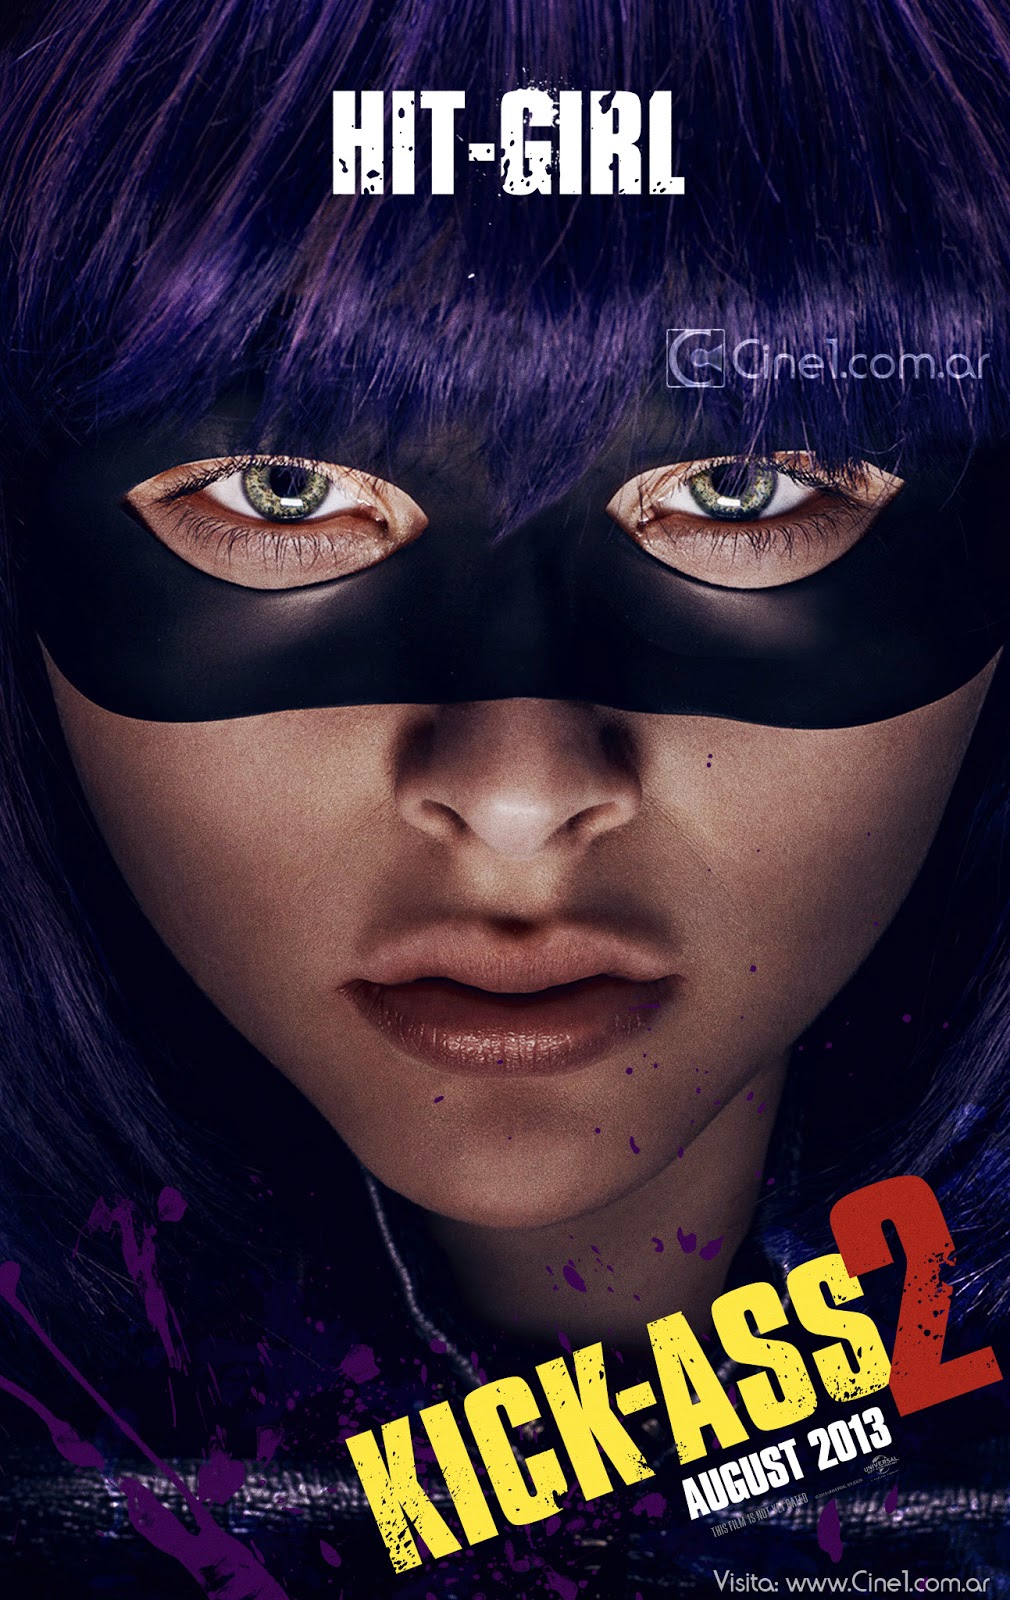 Kick Ass 2 Character Posters 6